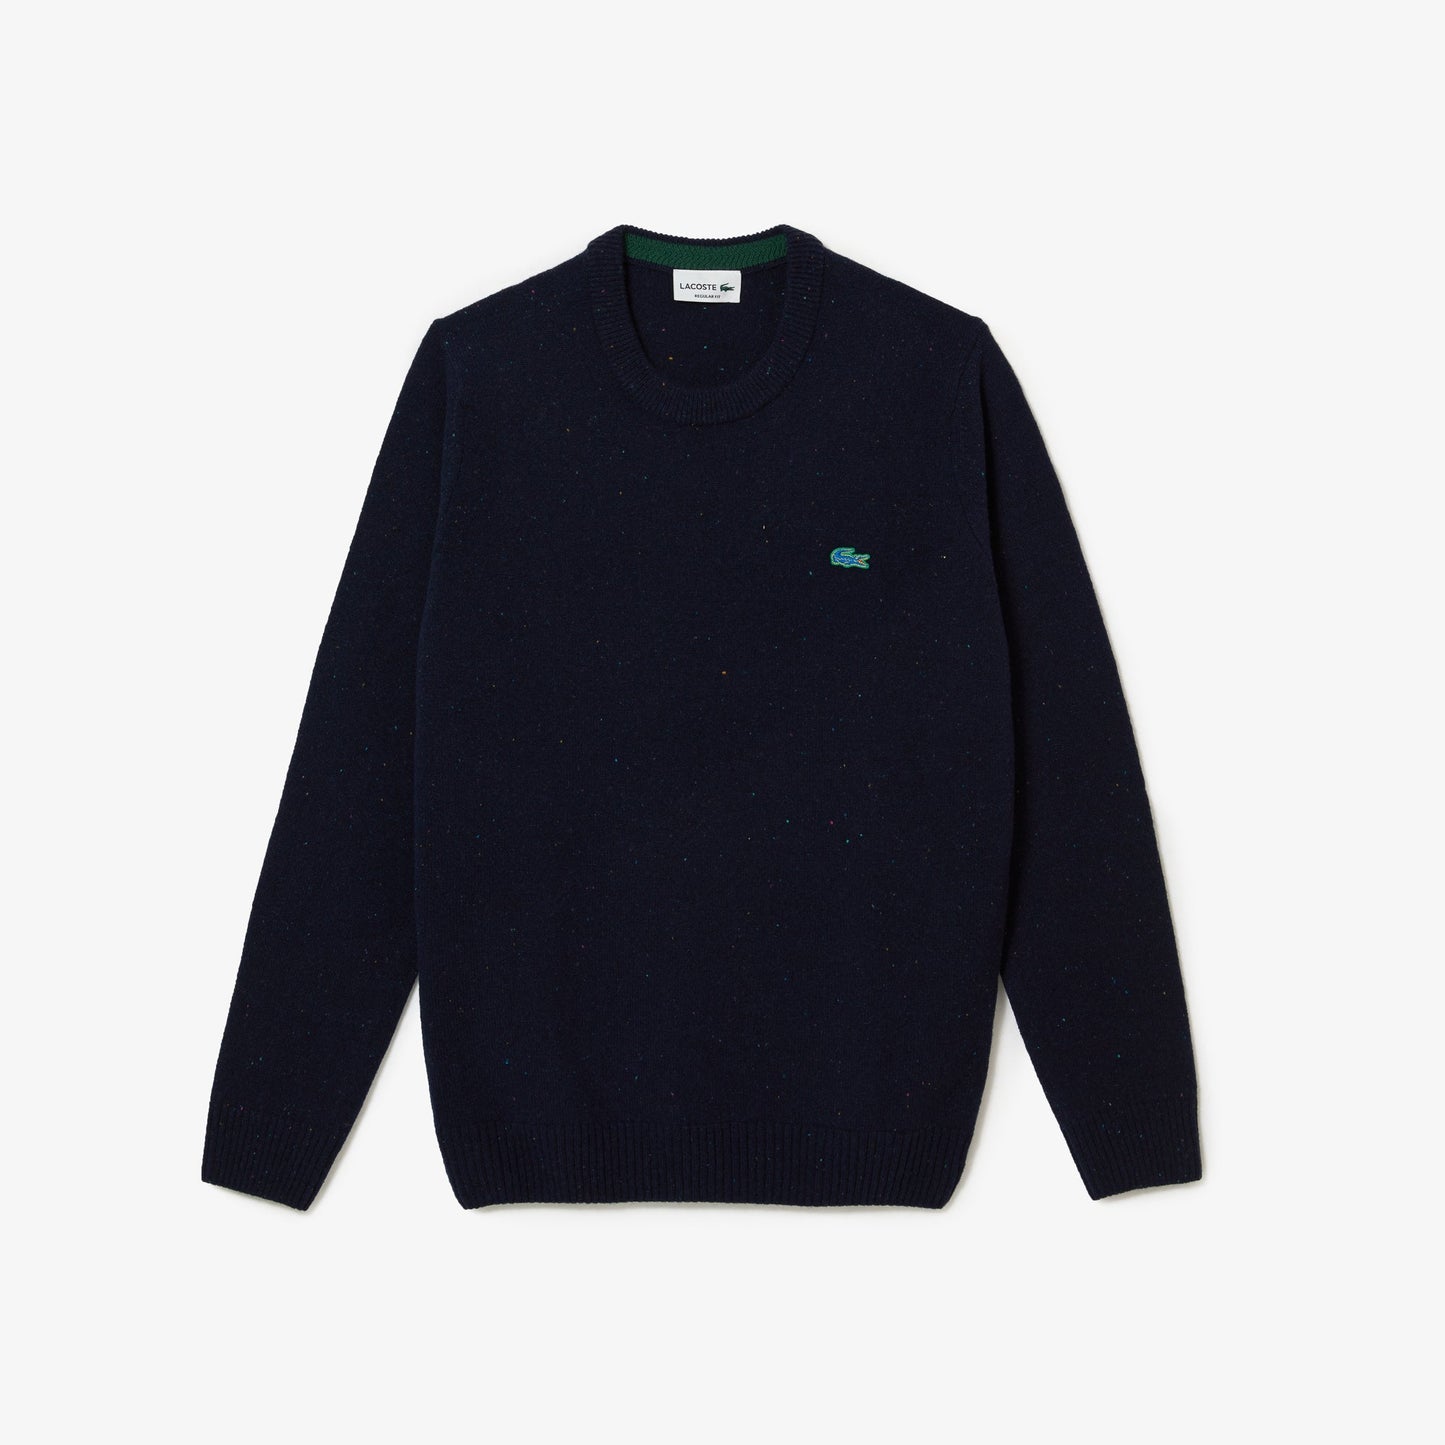 Shop The Latest Collection Of Lacoste Men'S Regular Fit Speckled Print Wool Jersey Sweater - Ah2341 In Lebanon